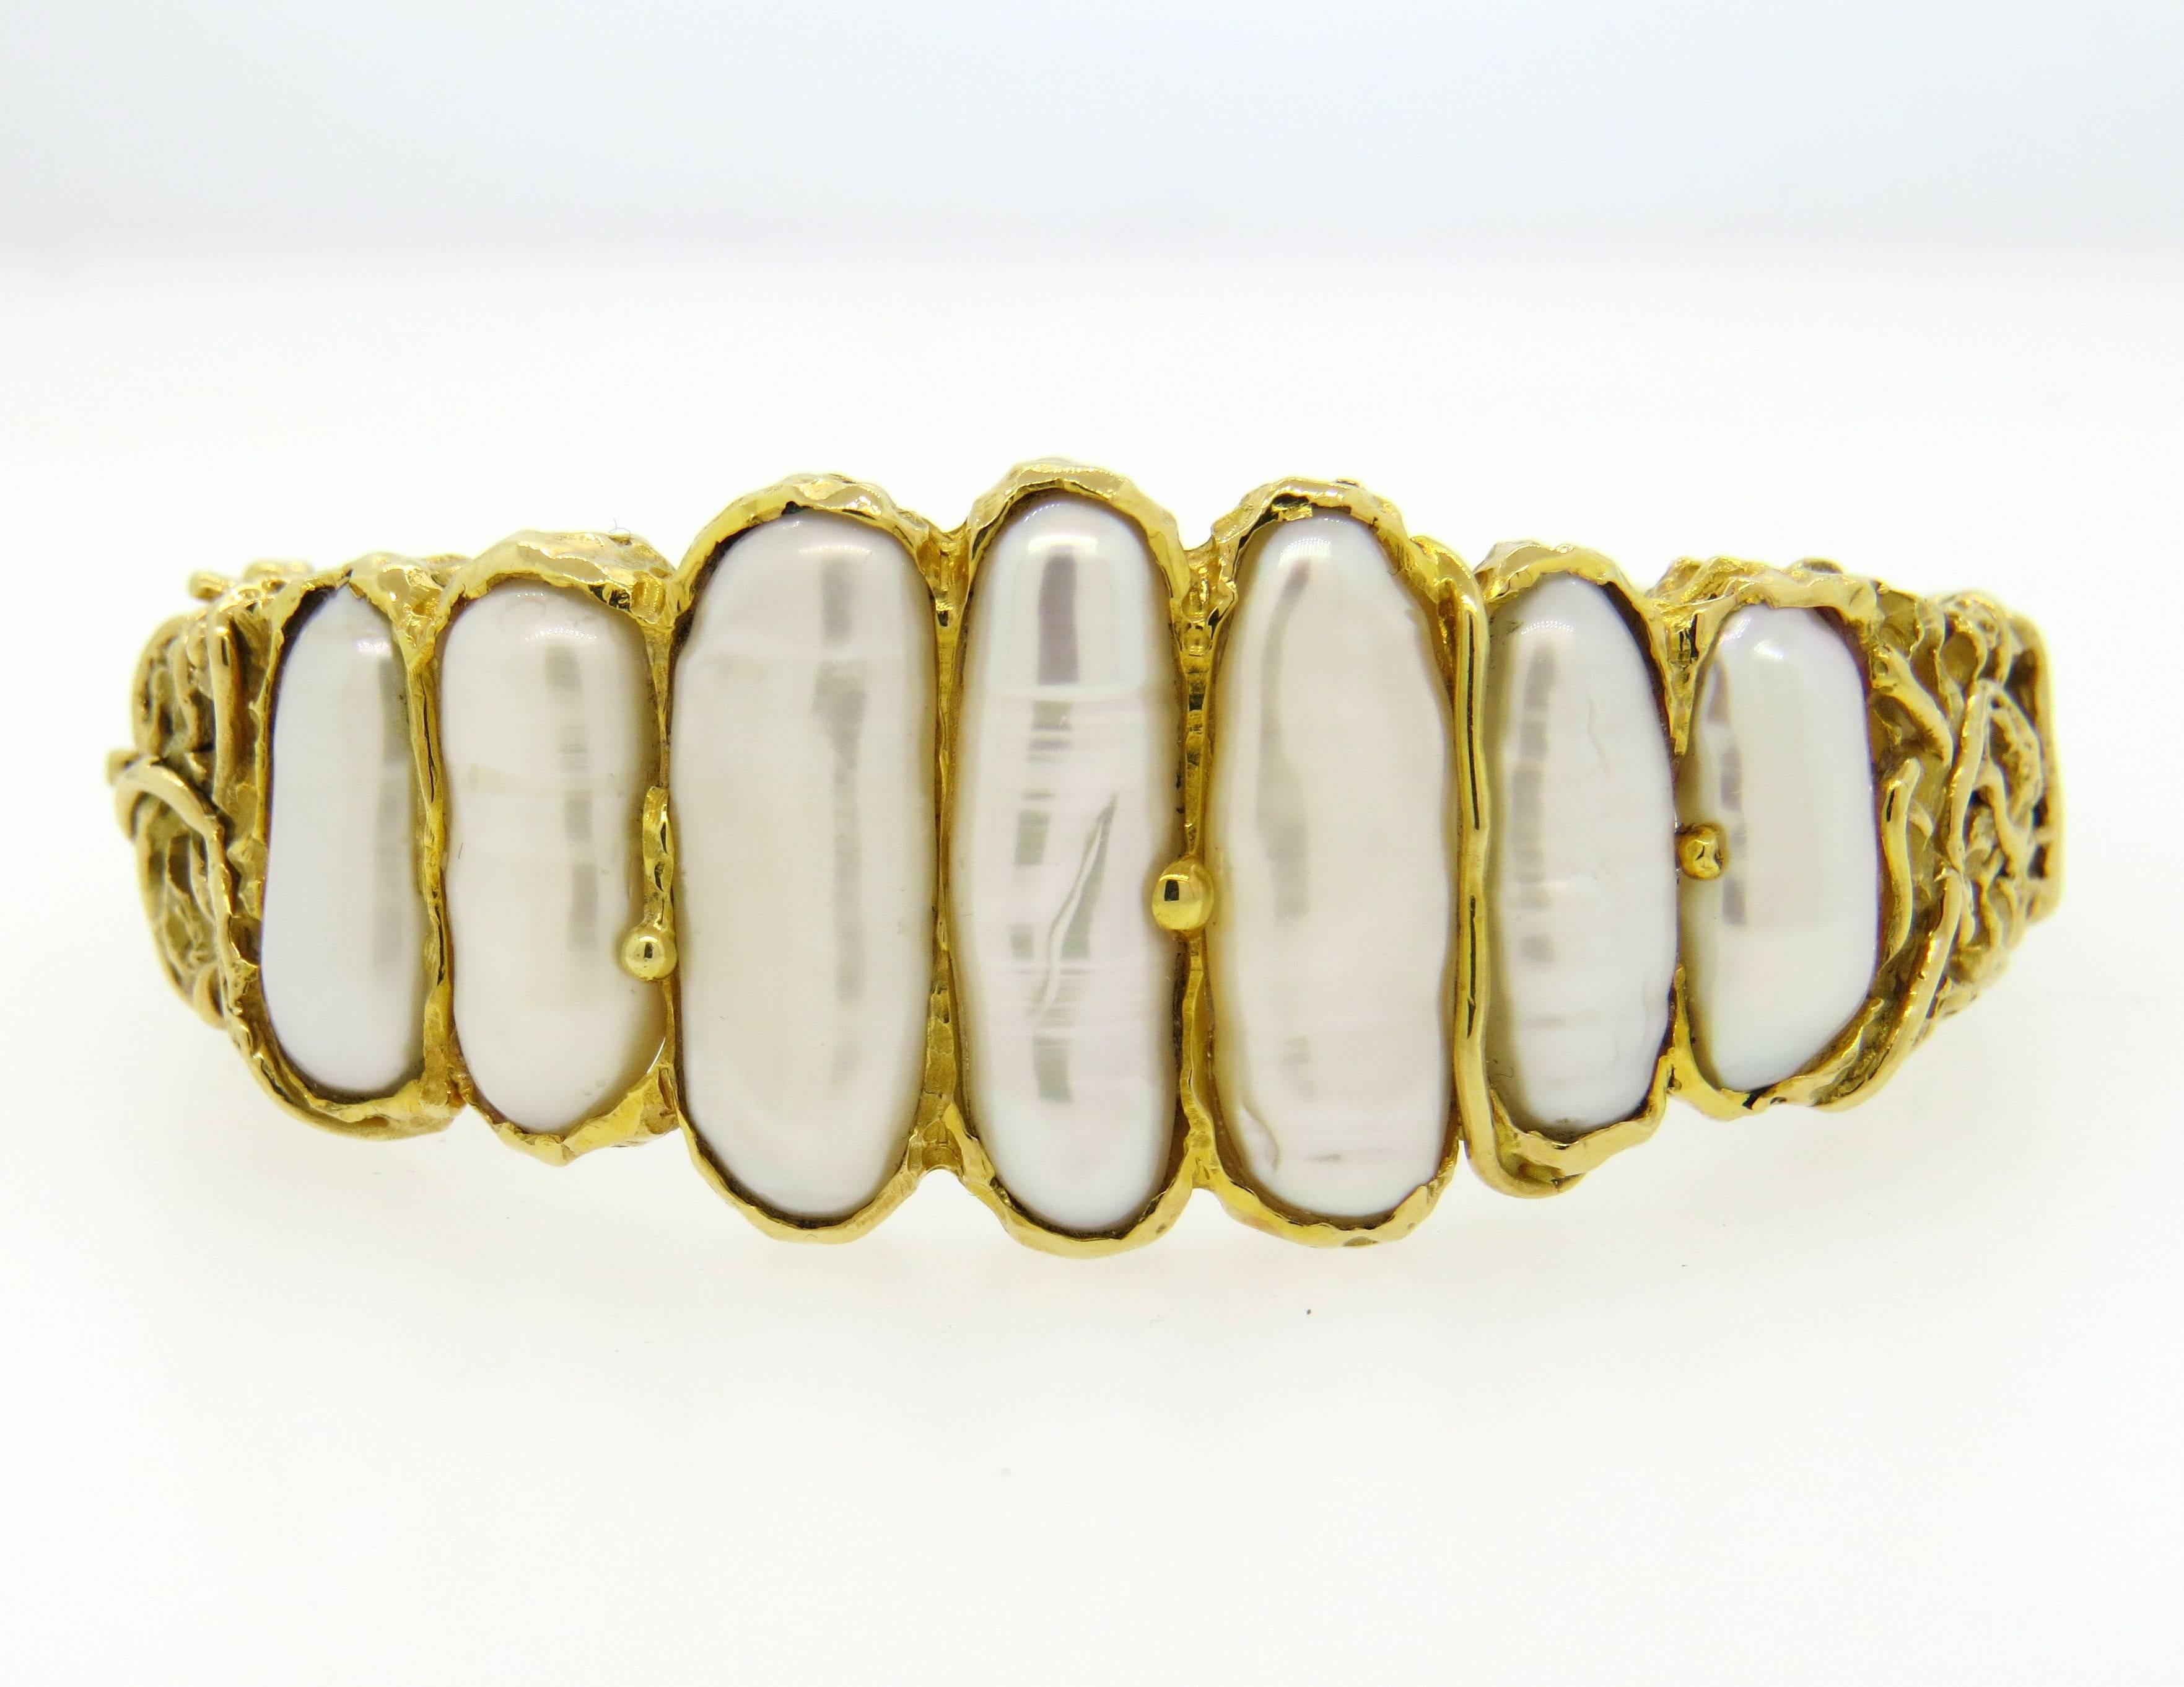 Elegant 18K Gold bracelet by Brinkhaus featuring graduated freshwater pearls in a naturalistic setting. Bracelet measures 25mm at widest point and will fit up to a 7